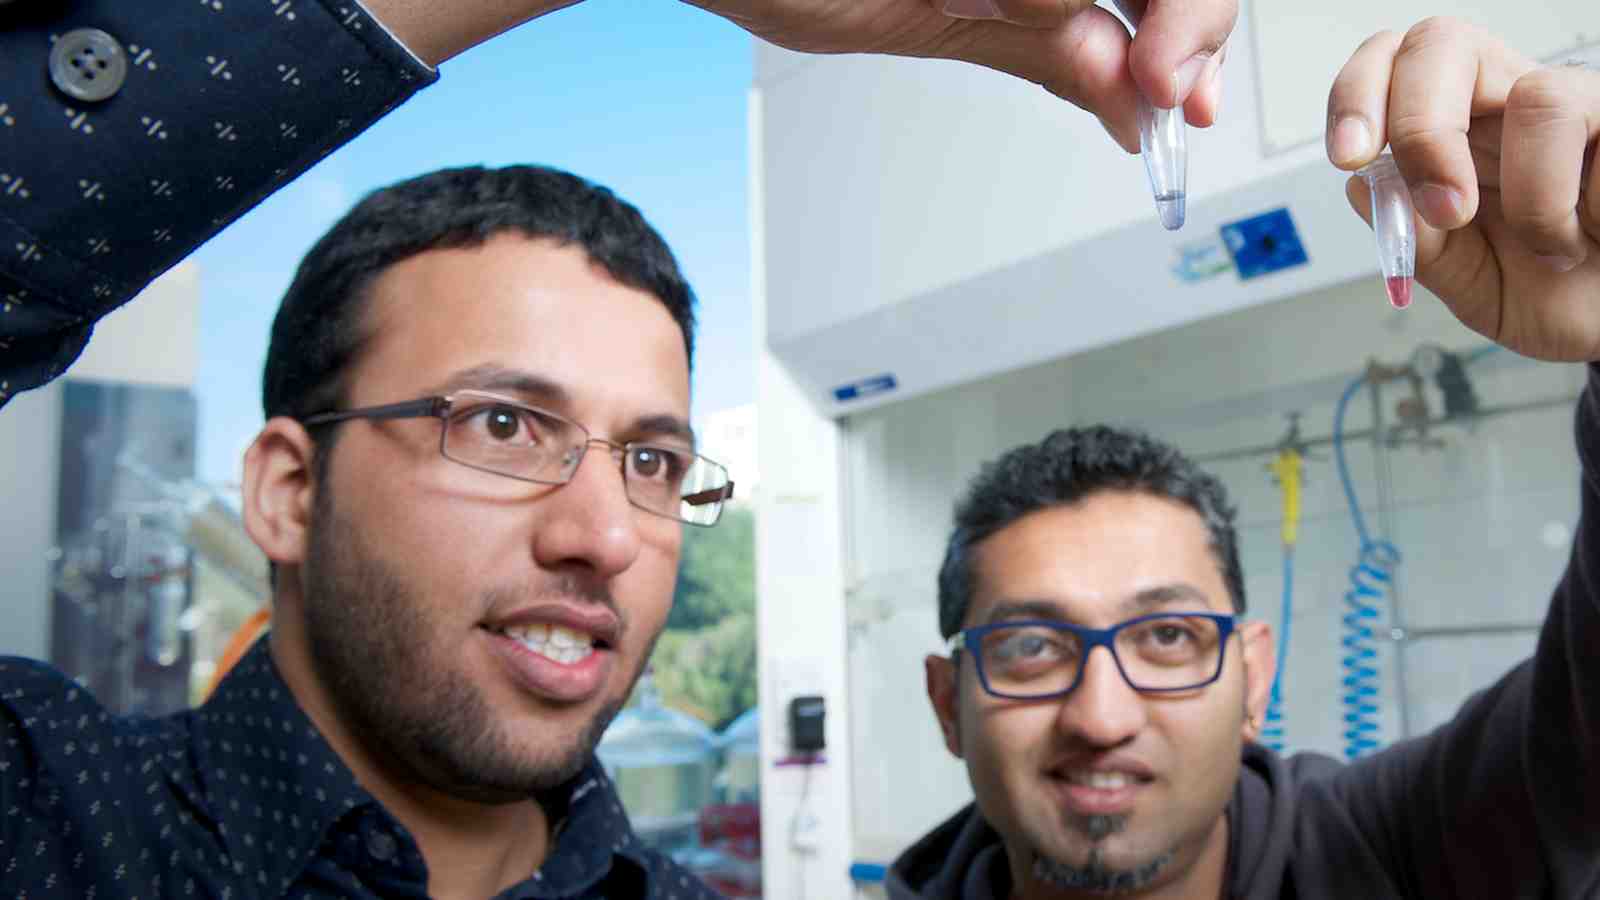 PhD students Shalen Kumar and Omar Alsager look at test tubes